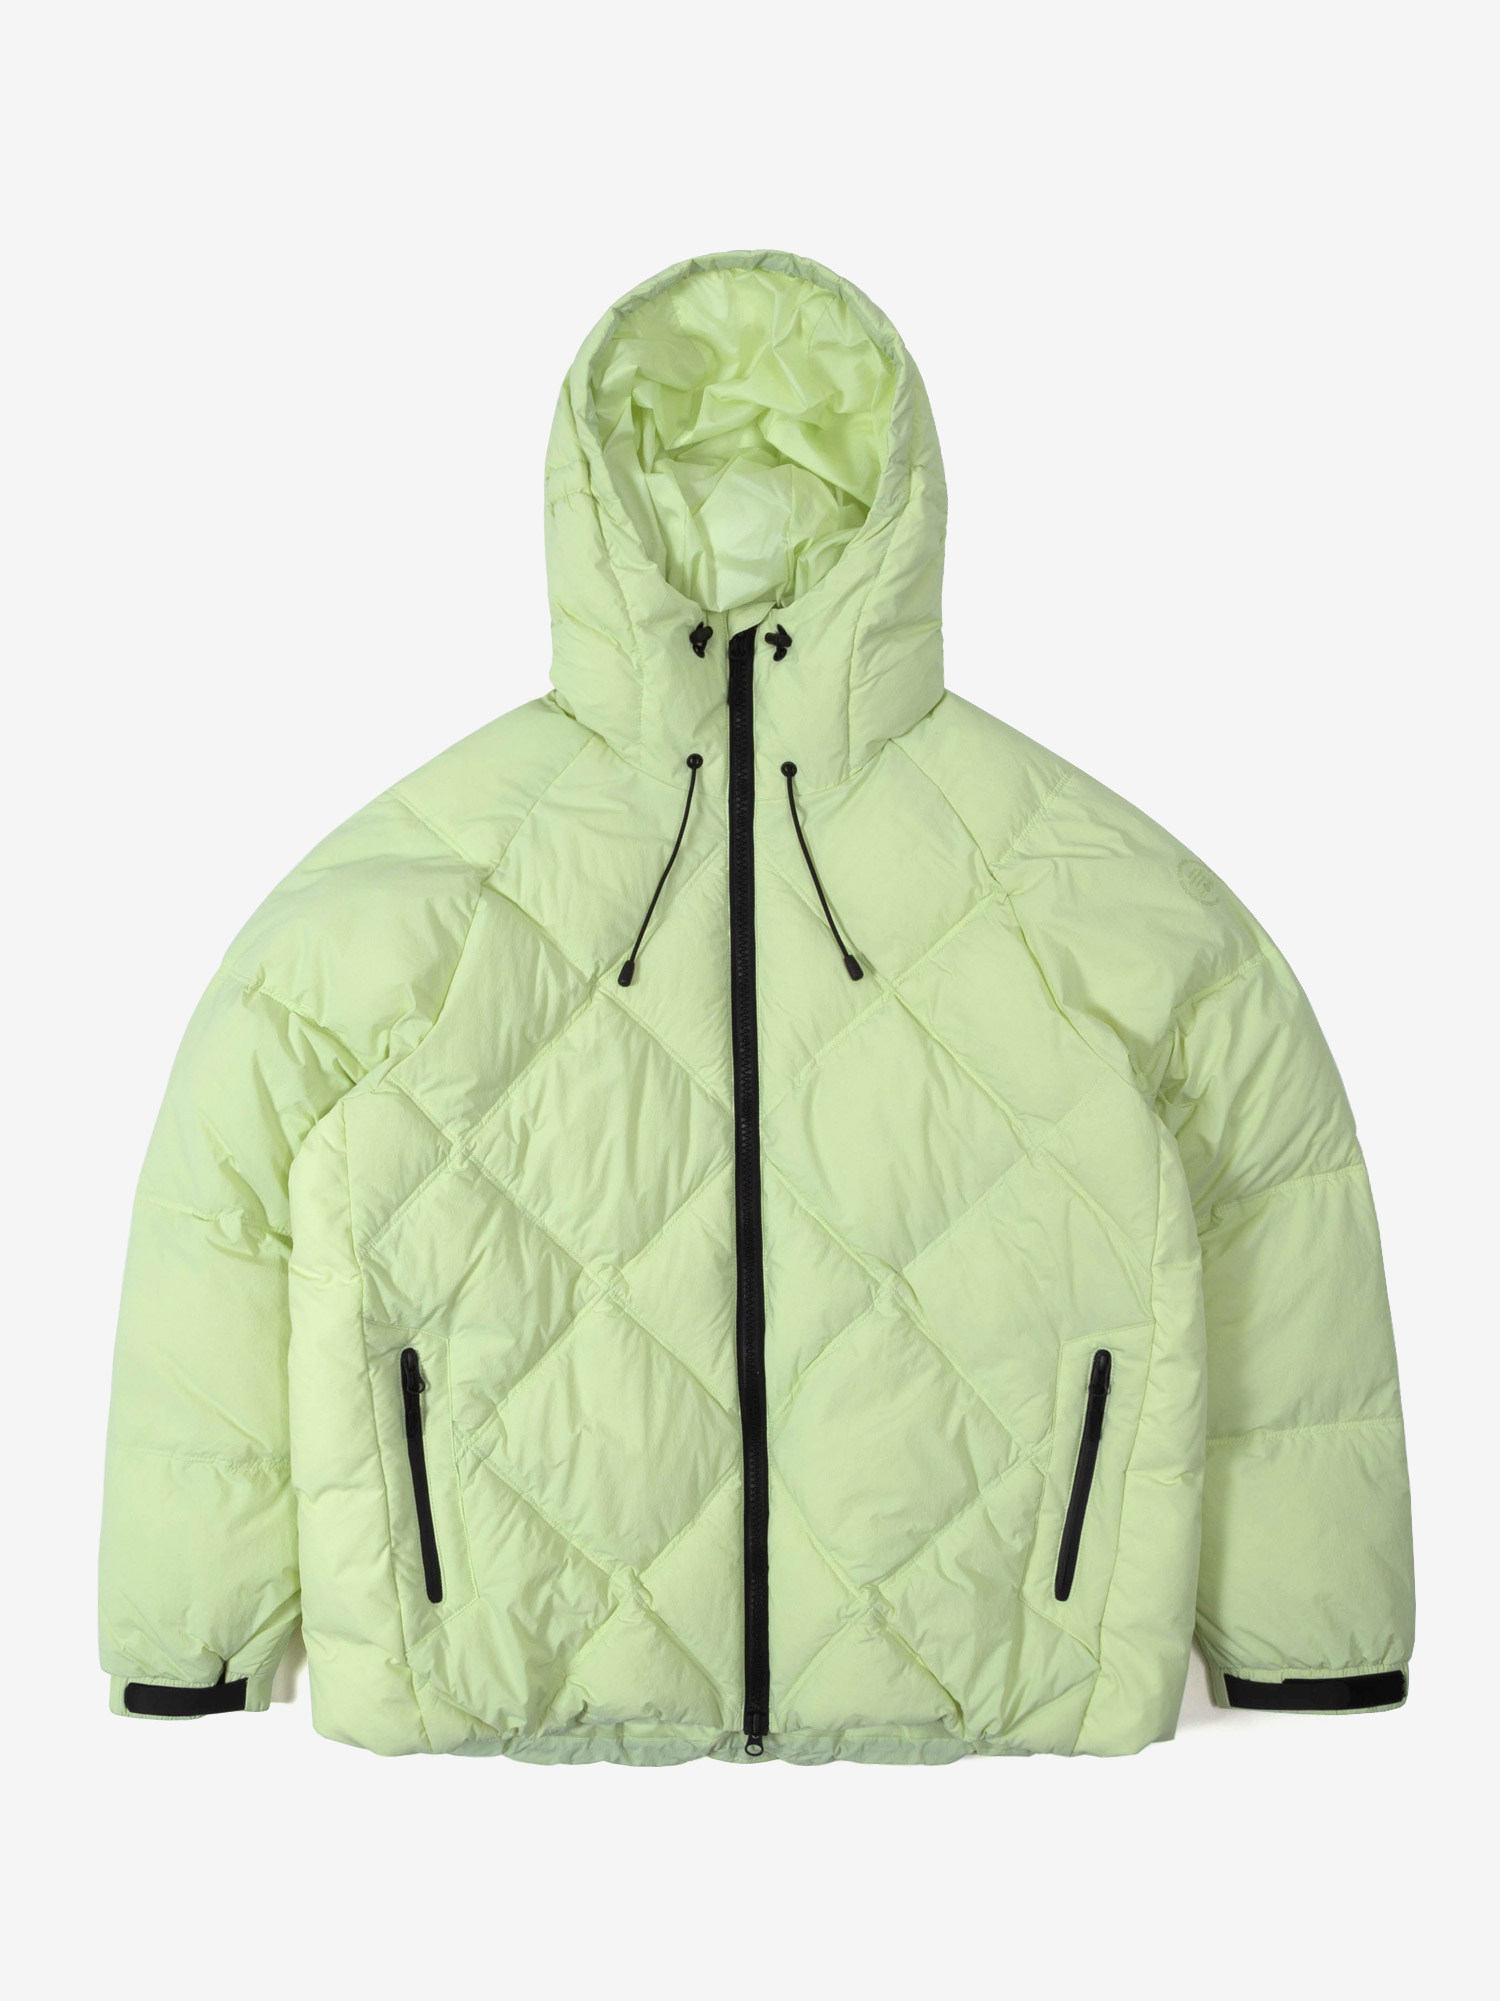 Featured image for “HIGH NECK FJORD PUFFA IN LIME”